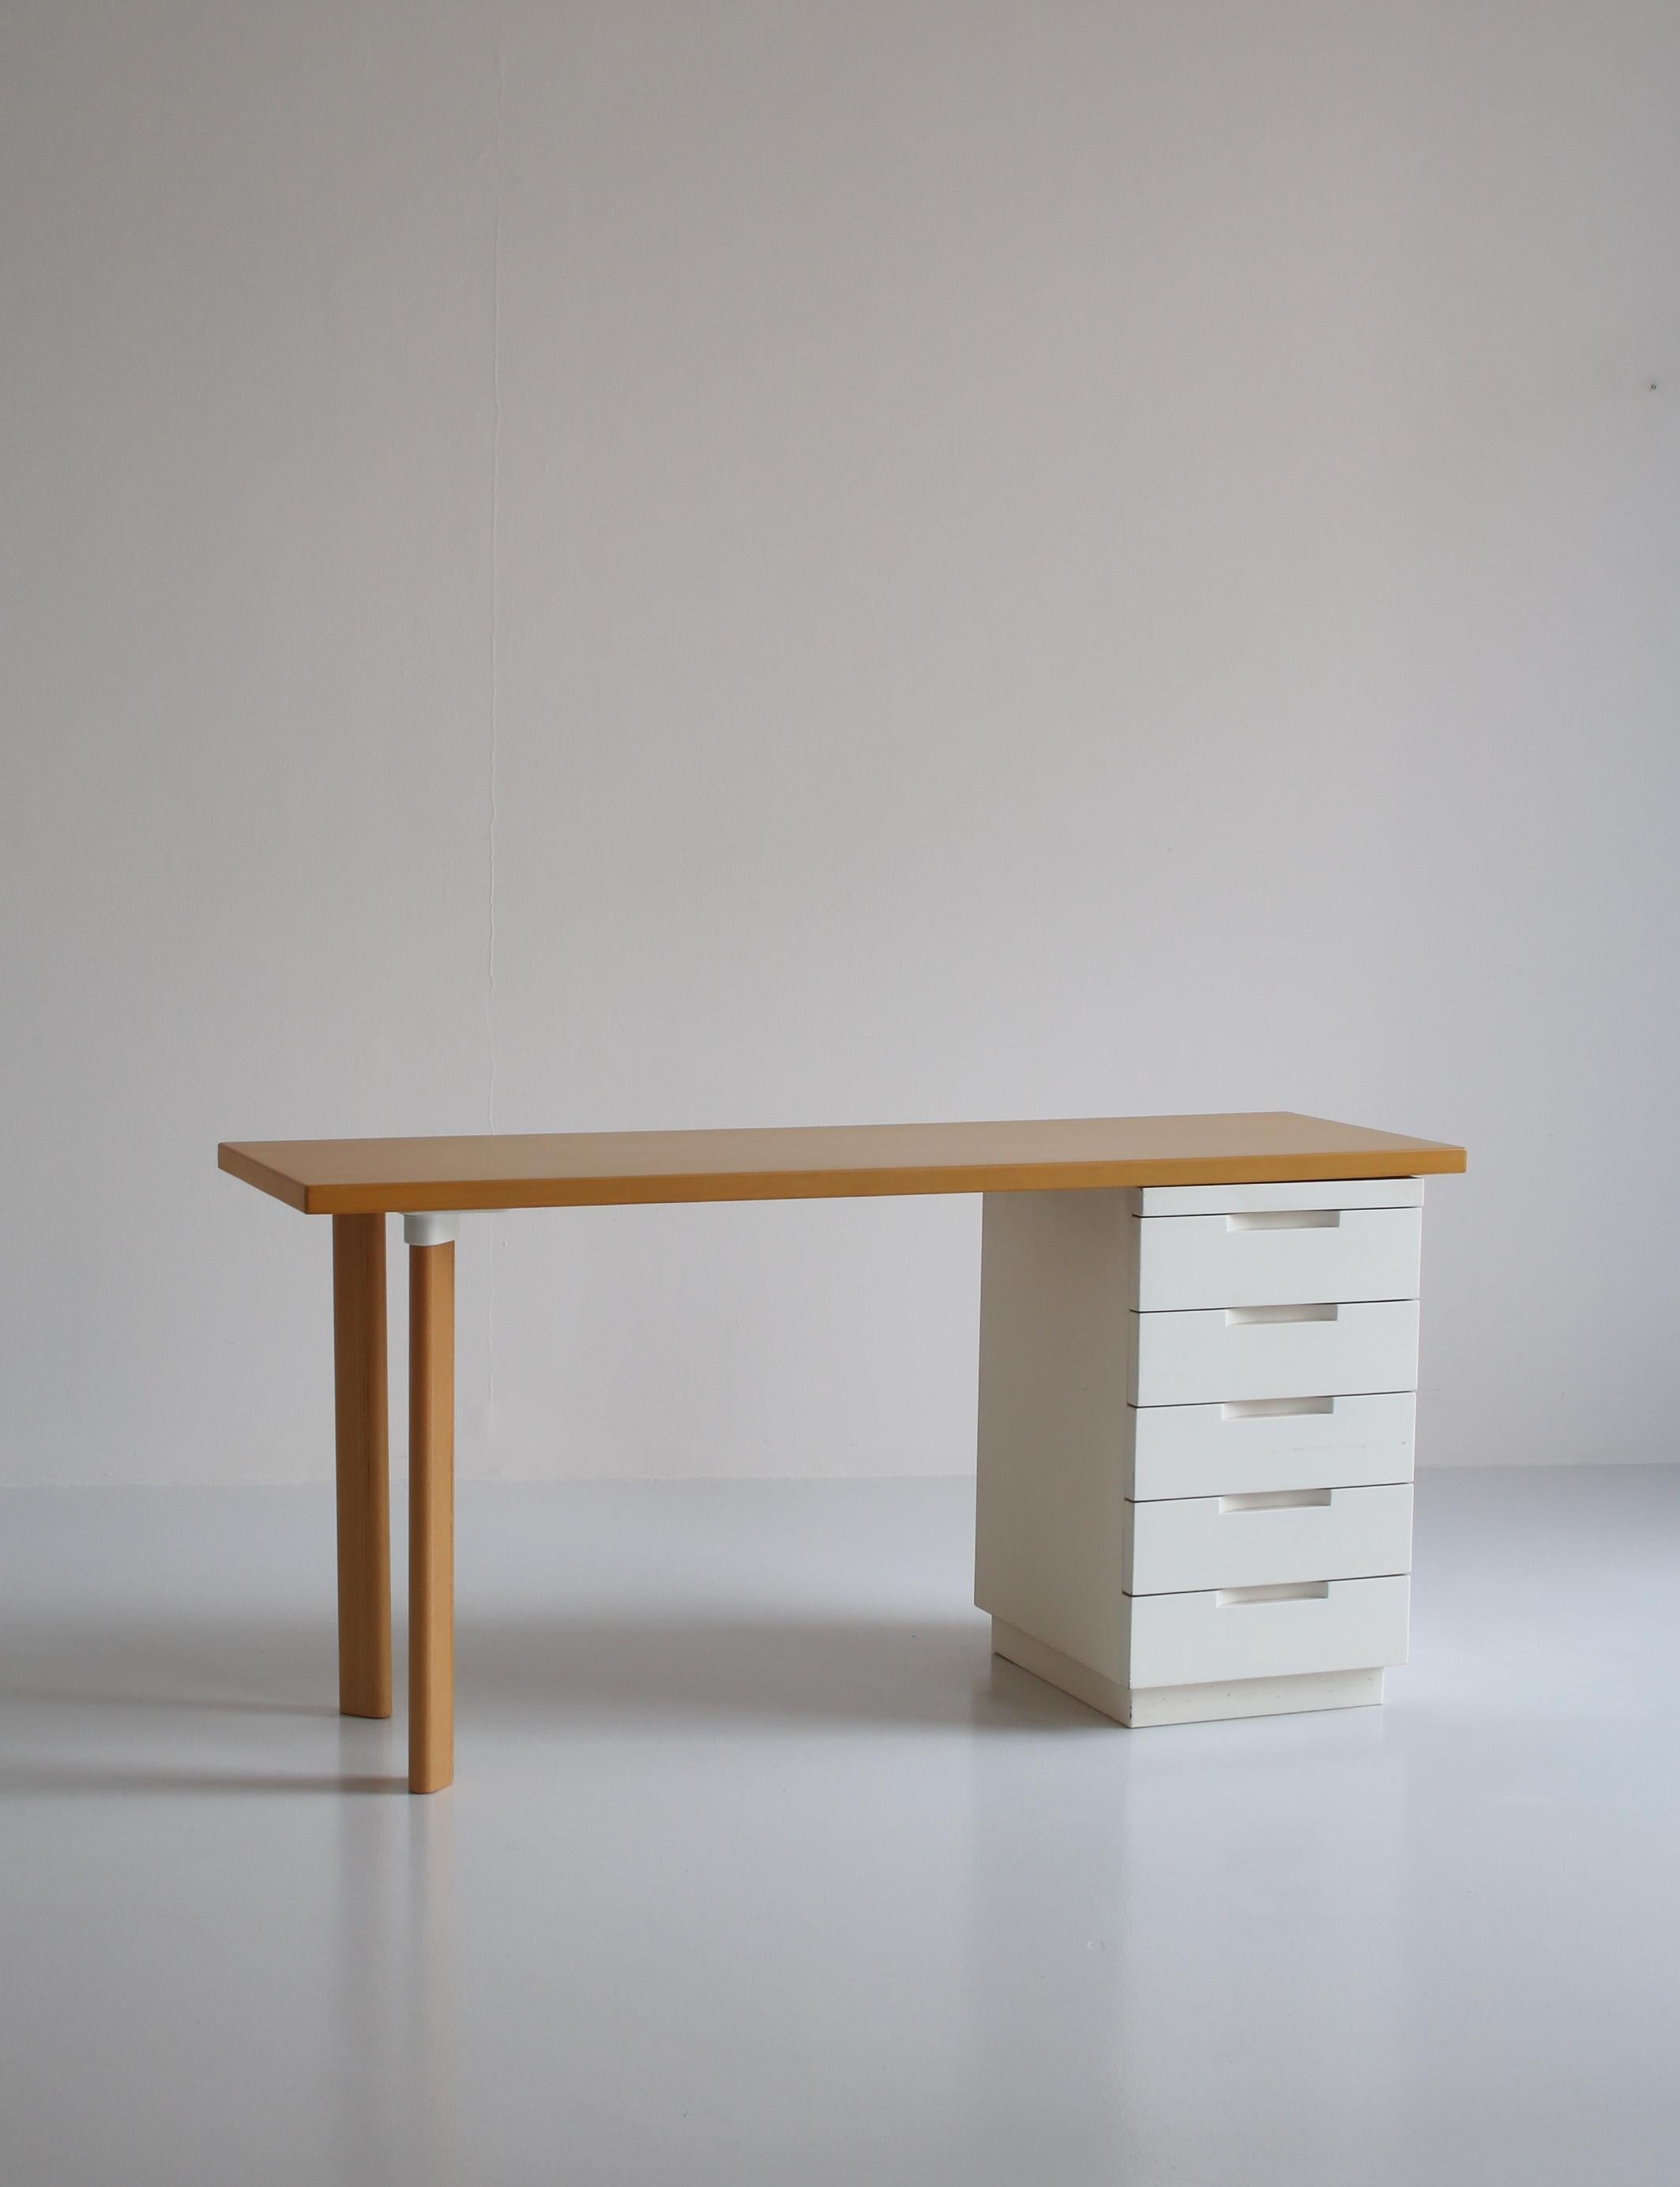 Alvar Aalto Desk and Chair Model 65, made by Artek, Finland in the 1960s 2